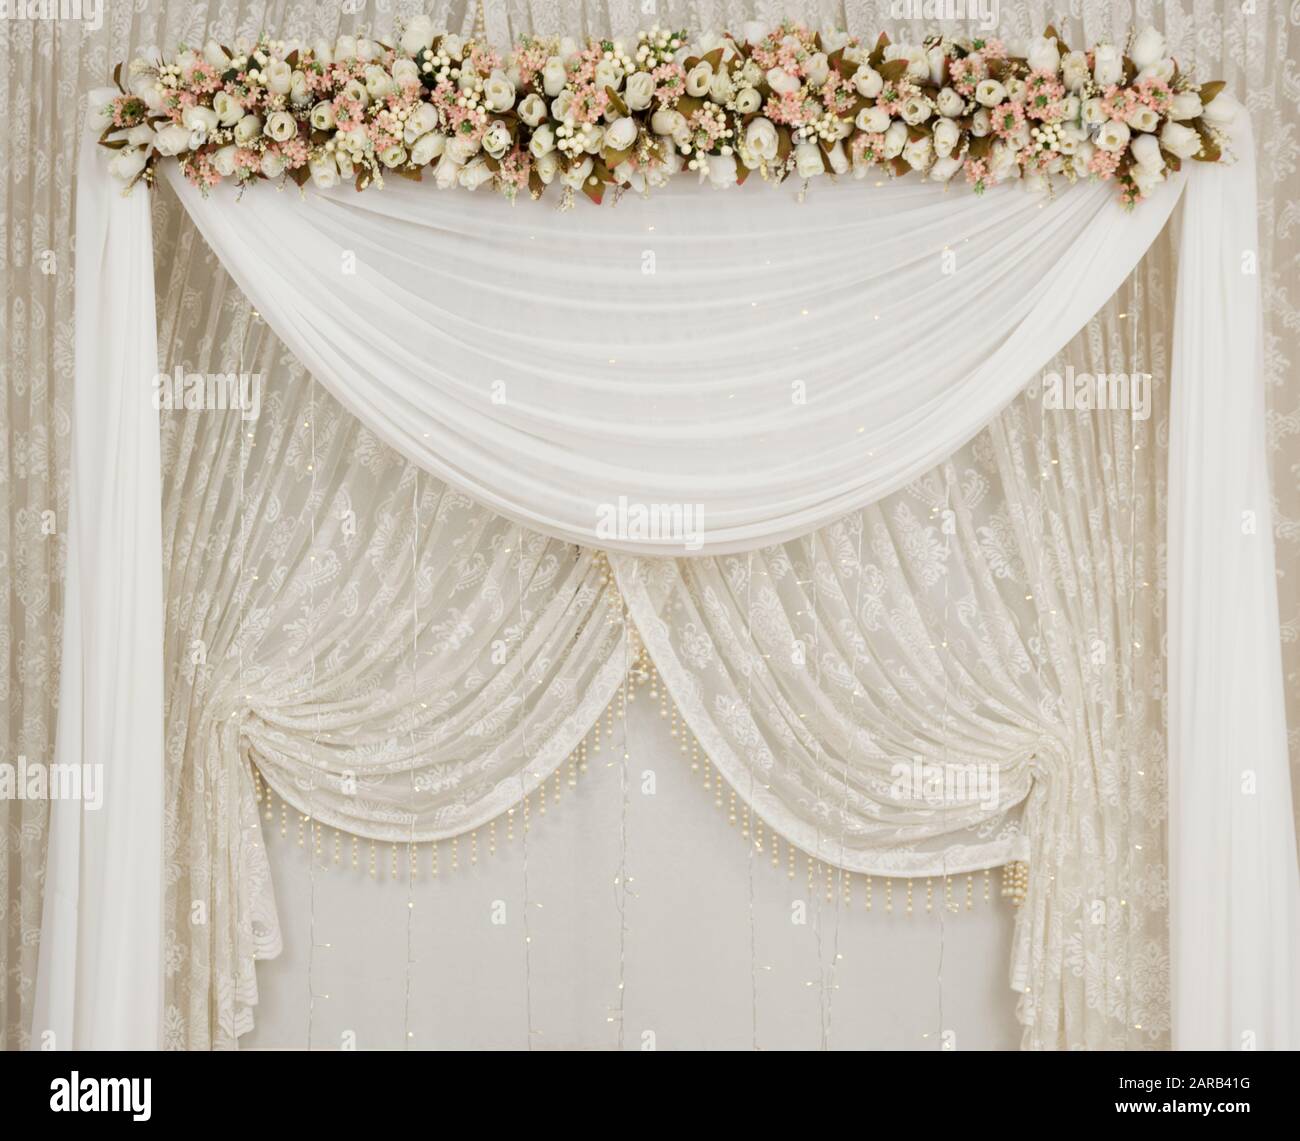 Modern Turkish marriage celebration table concept and home ...